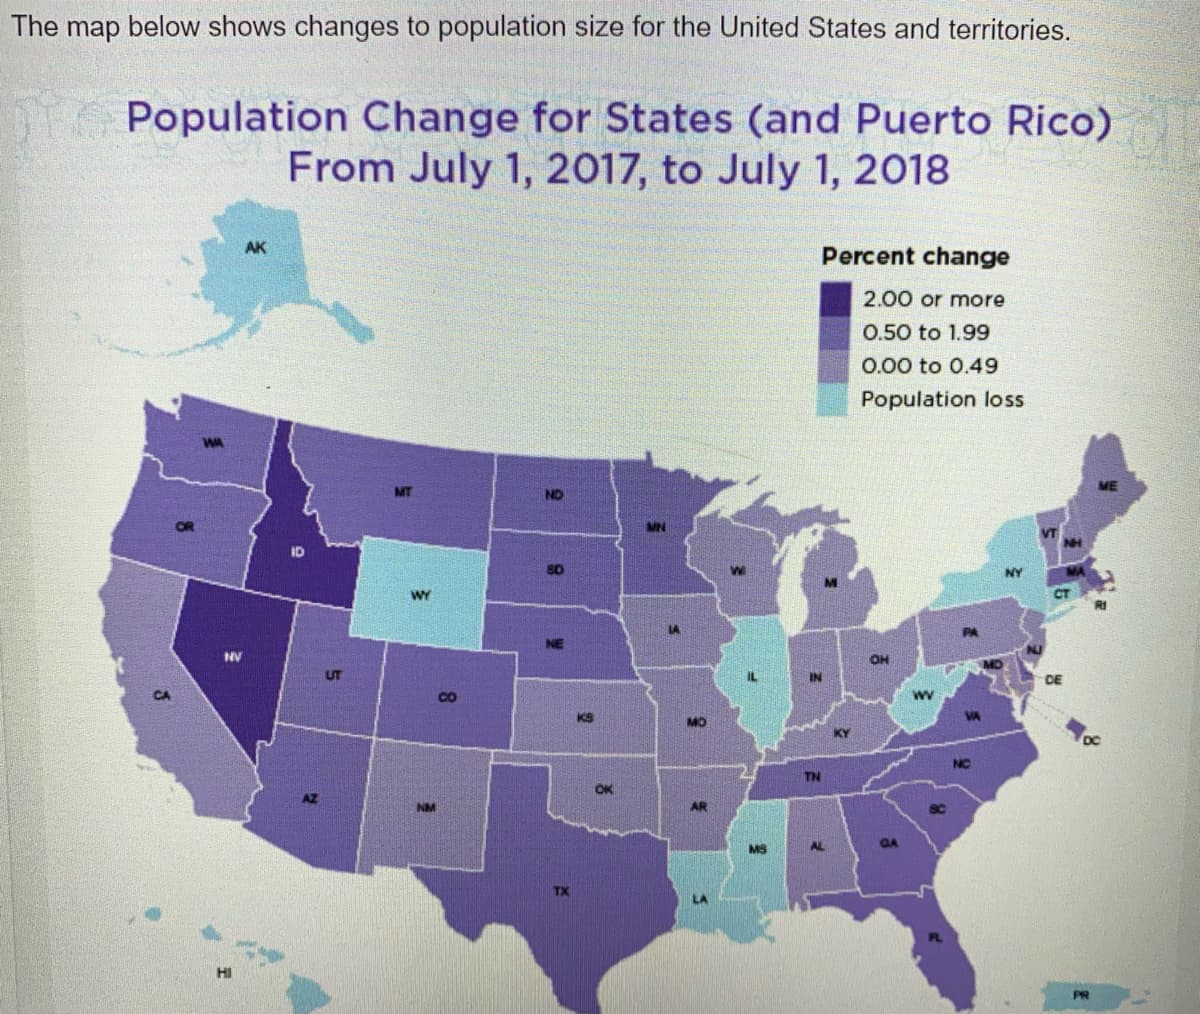 The map below shows changes to population size for the United States and territories.
Population Change for States (and Puerto Rico)
From July 1, 2017, to July 1, 2018
AK
Percent change
2.00 or more
0.50 to 1.99
0.00 to 0.49
Population loss
SD
WY
CT
NV
OH
UT
DE
MO
OK
